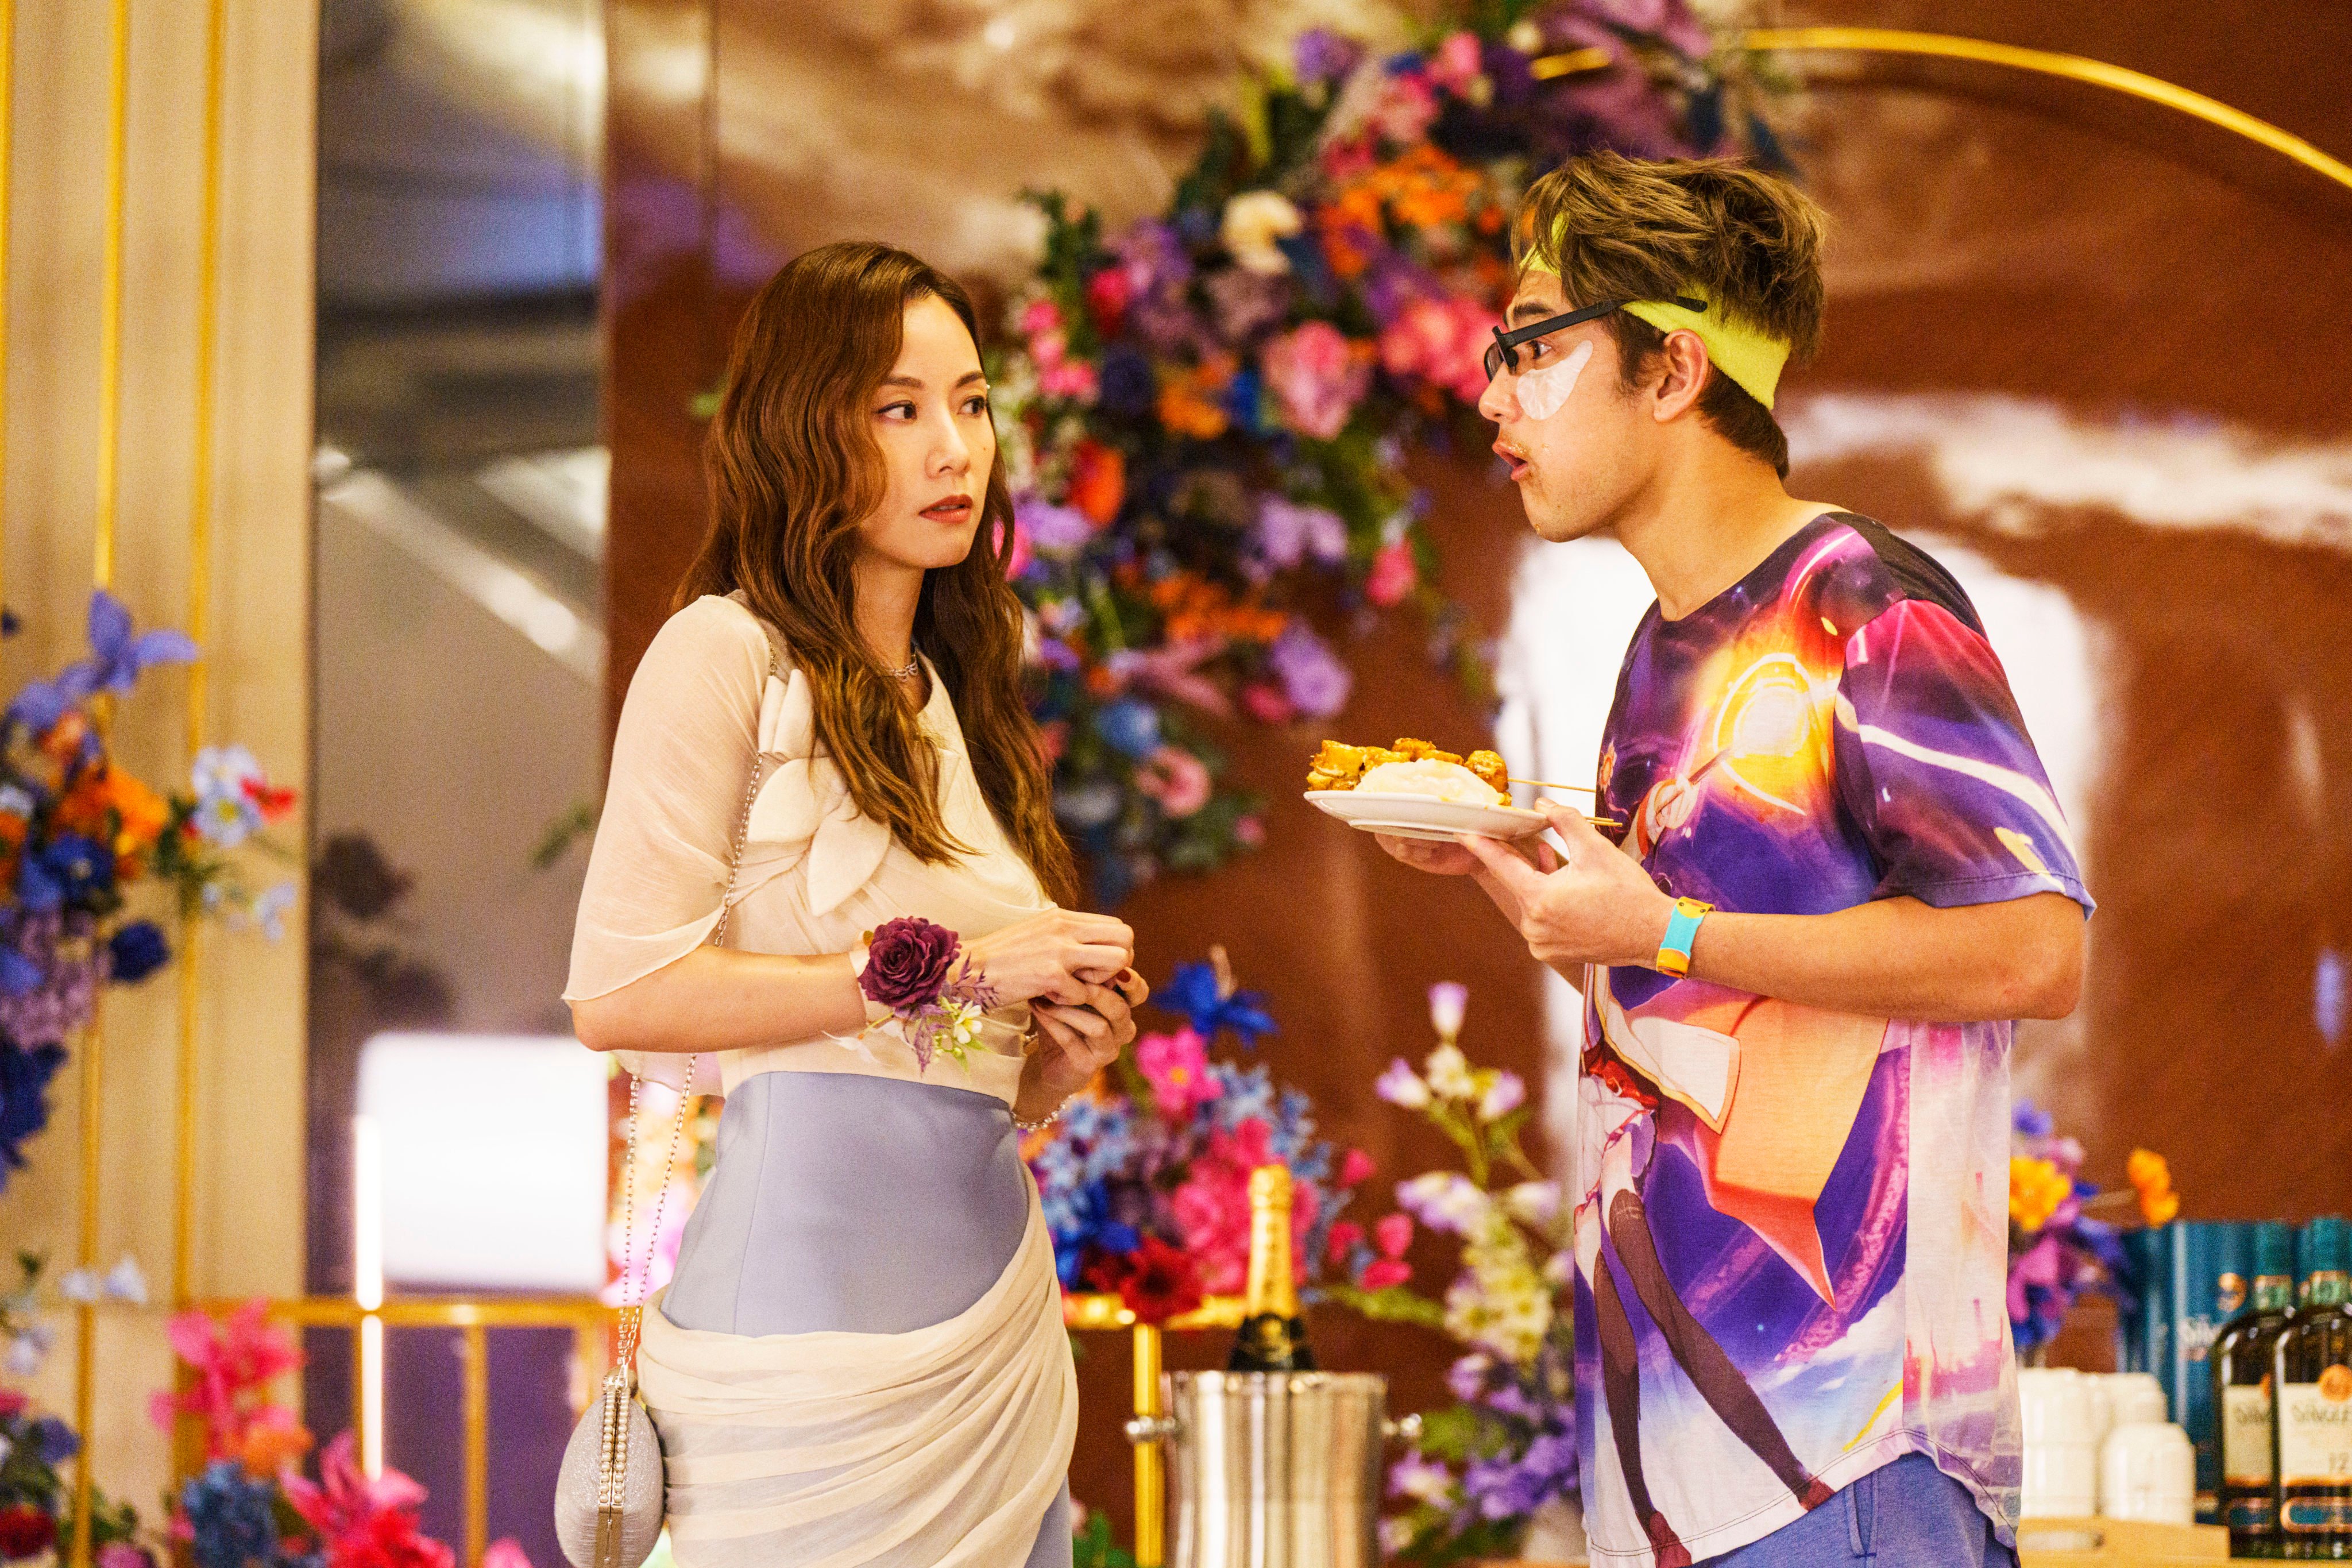 Stephy Tang (left) and Jeffrey Ngai in a still from Table for Six 2 (Category: IIA, Cantonese), directed by Sunny Chan and co-starring Louis Cheung and Ivana Wong.